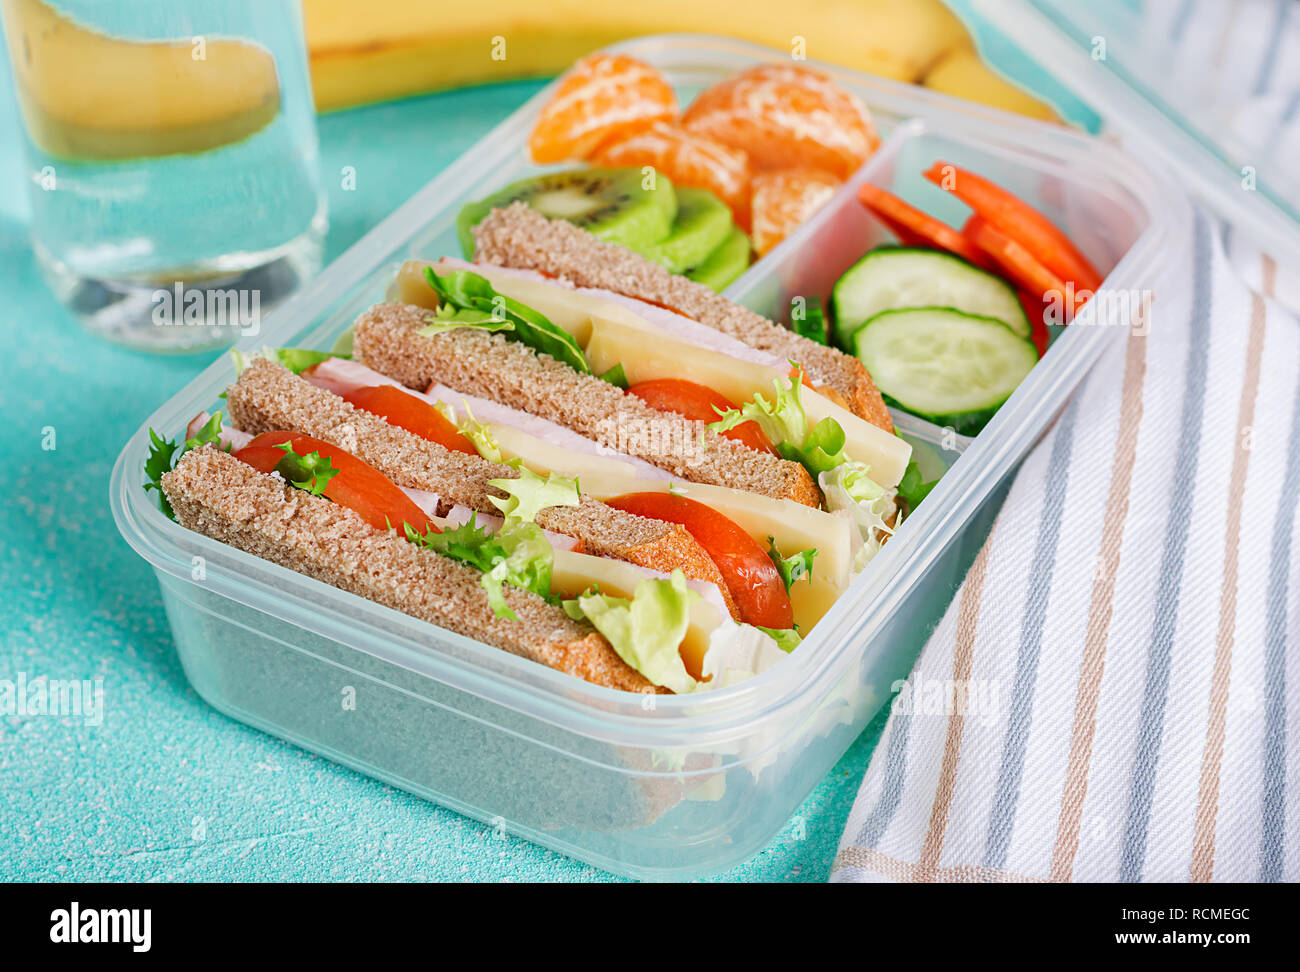 School lunch box with sandwich, vegetables, water, and fruits on